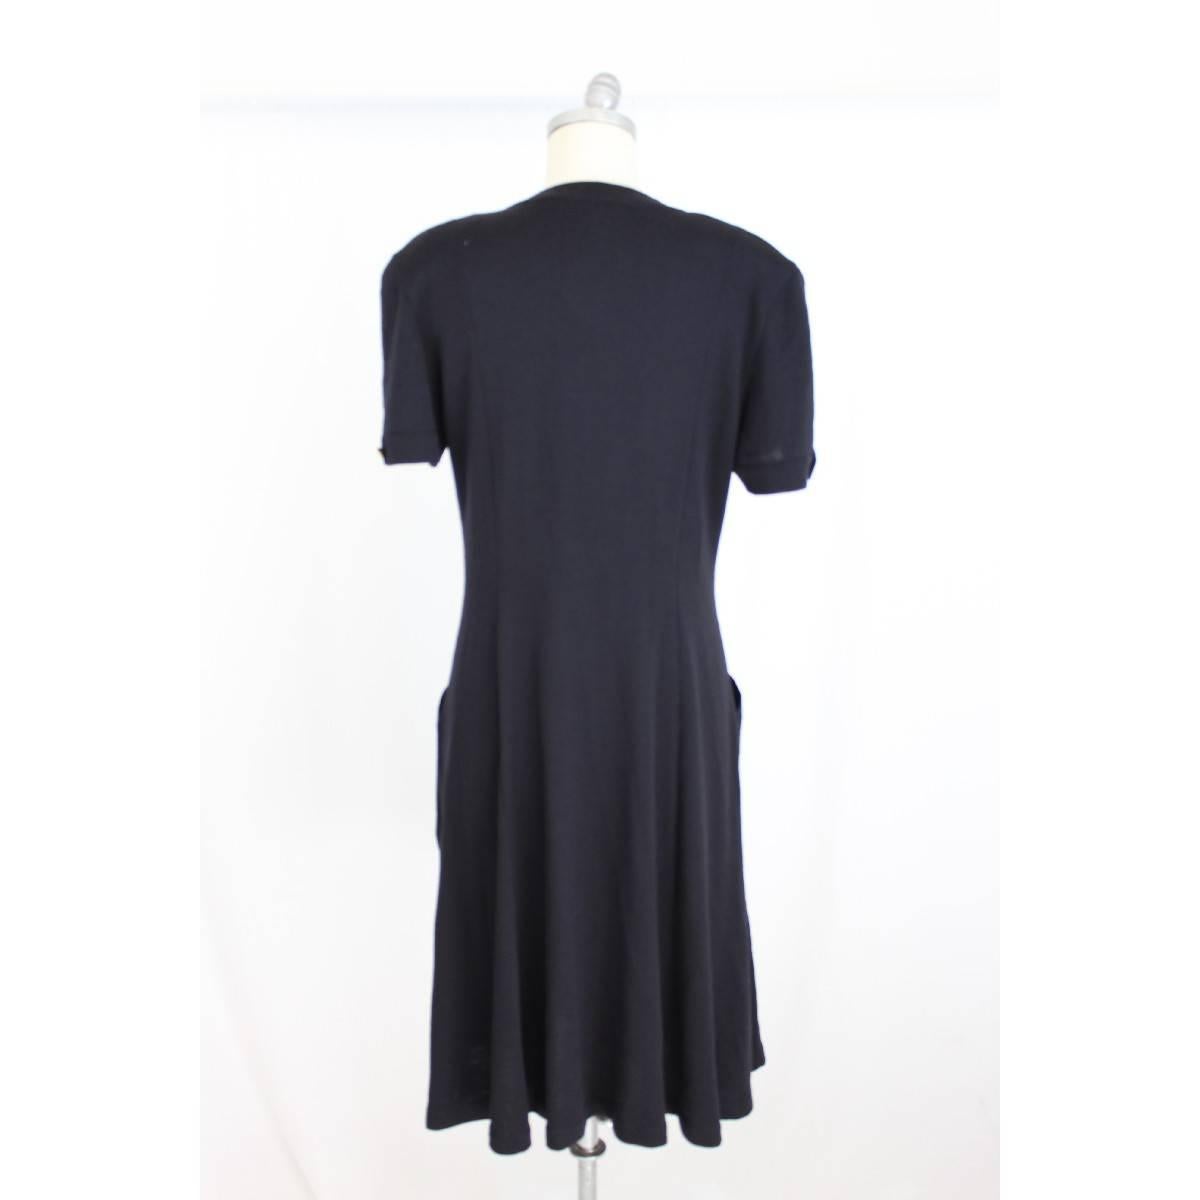 Escada by Margaretha Ley vintage pure wool black long dress, size 38 de, made germany, closure with gold buttons along the dress, two pockets on the sides, short sleeves, excellent condition.

Size: 38 de 44 en 10 Us 12 Uk

Shoulder: 46 cm
Armpit